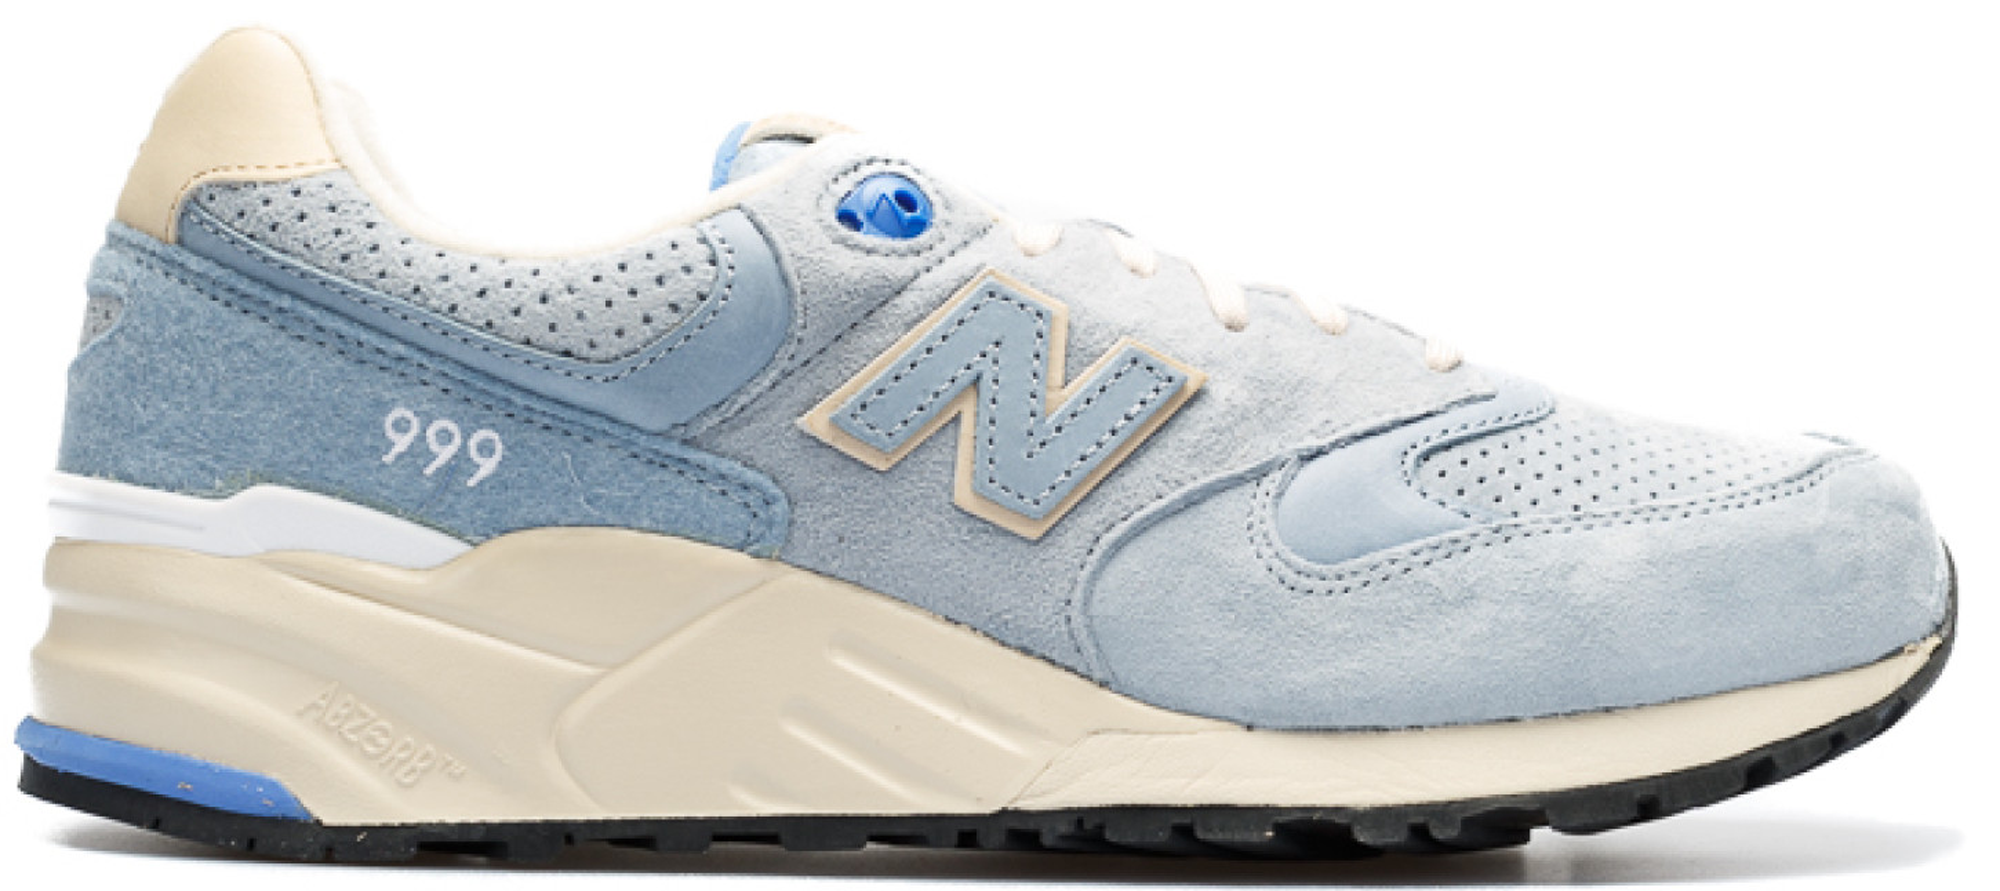 new balance 999 beige and blue